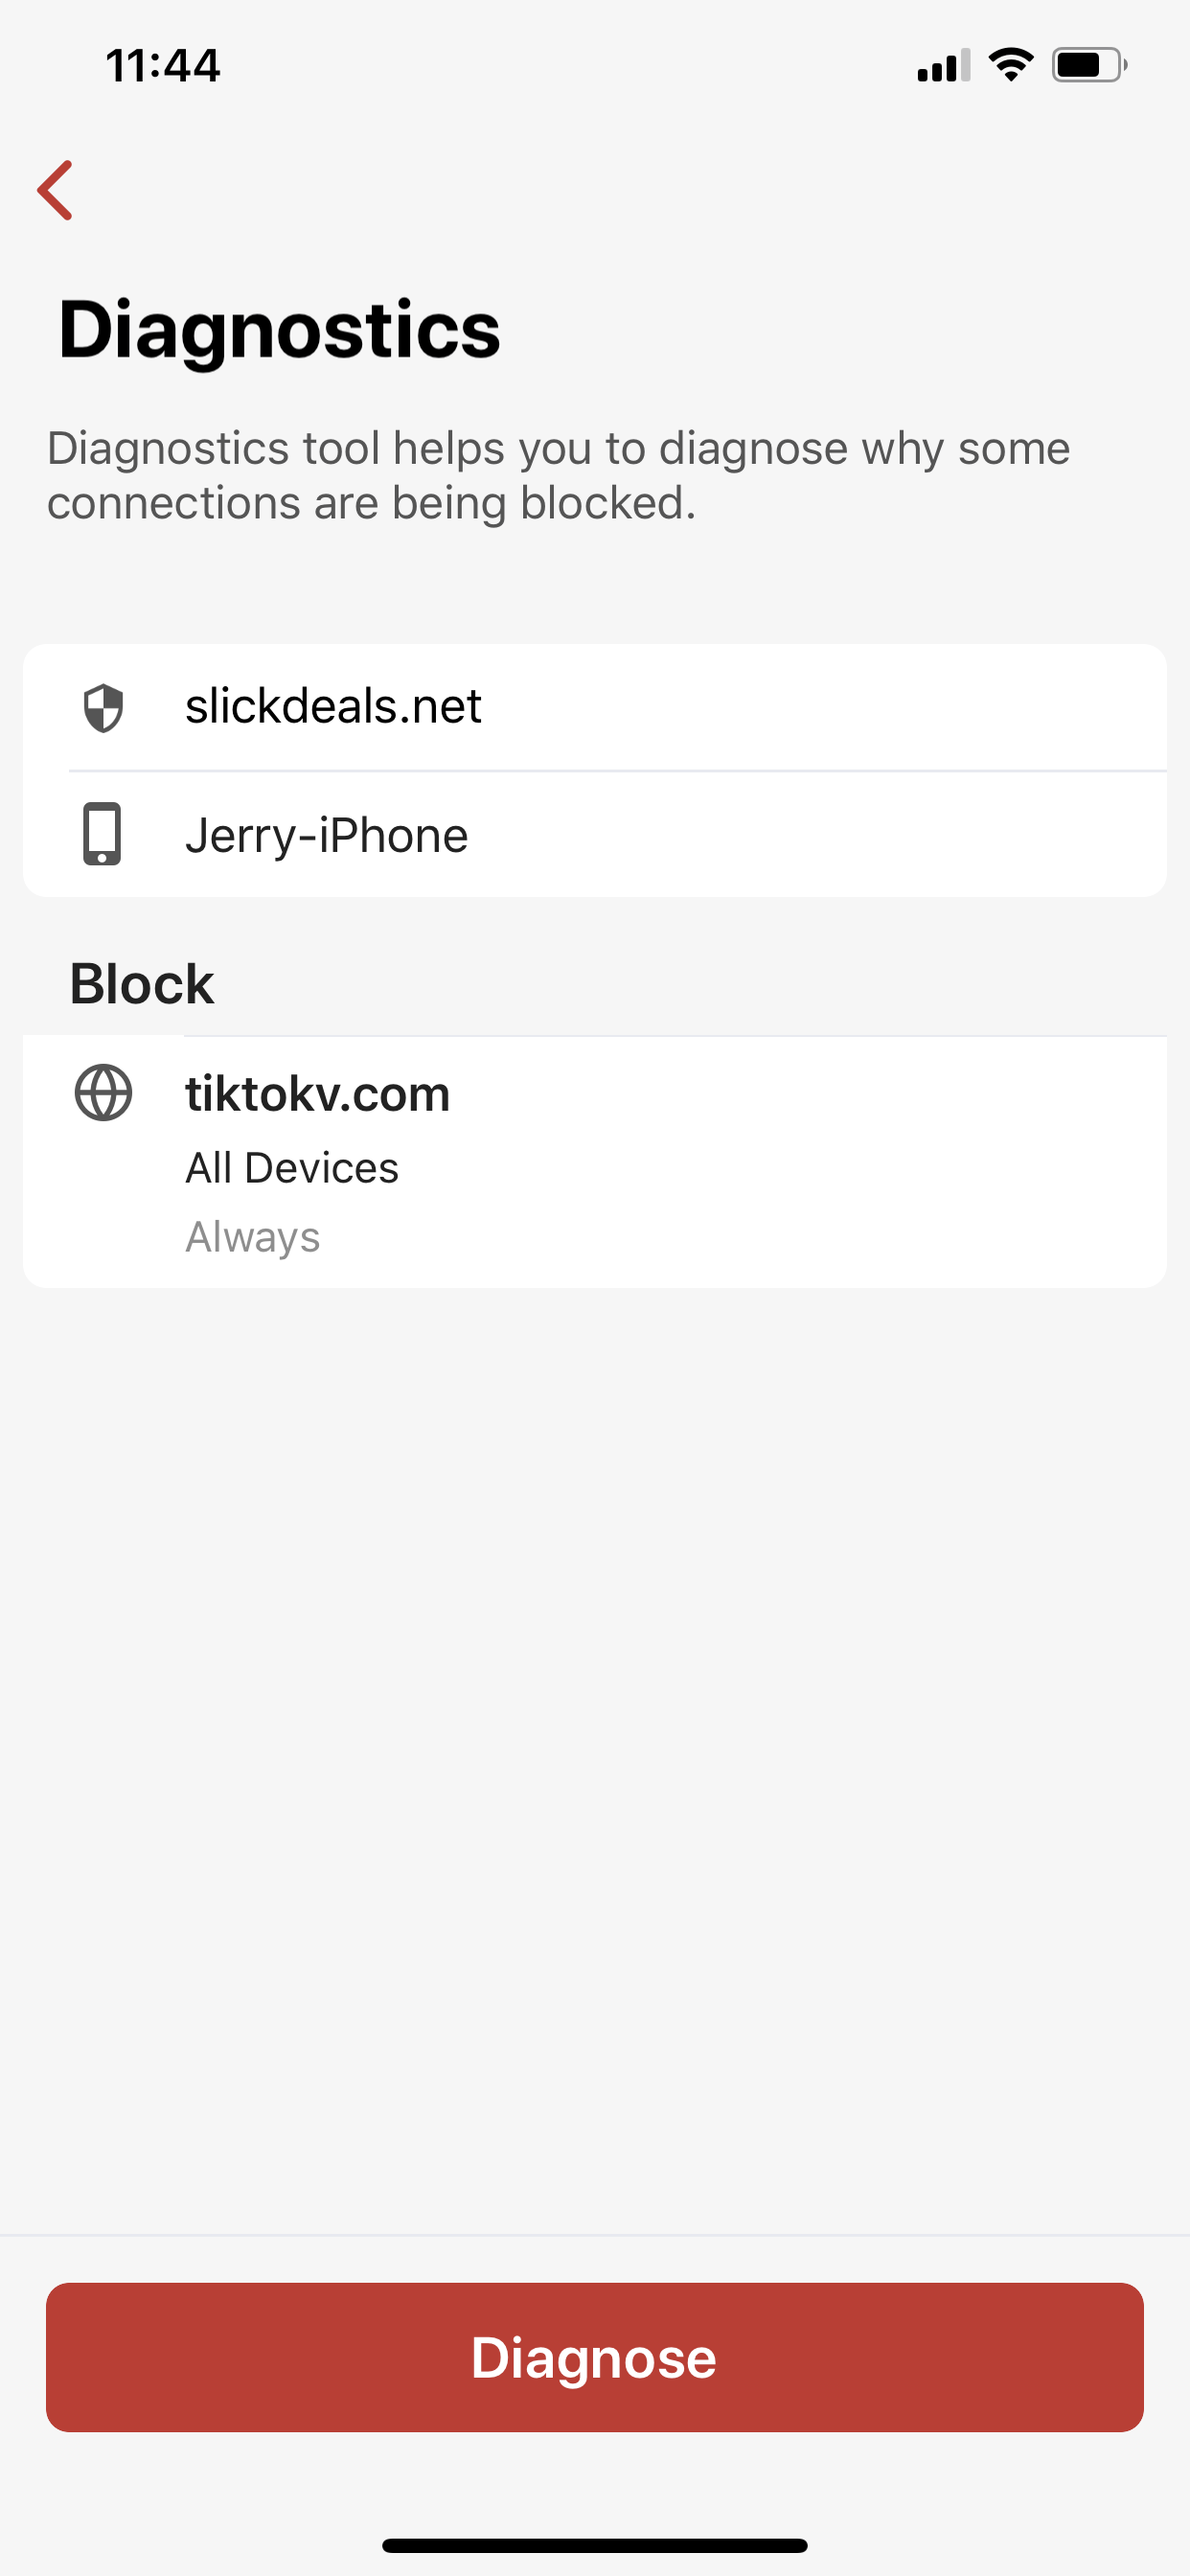 Using the Diagnose Tool in the Firewalla app help explain why some connections are blocked